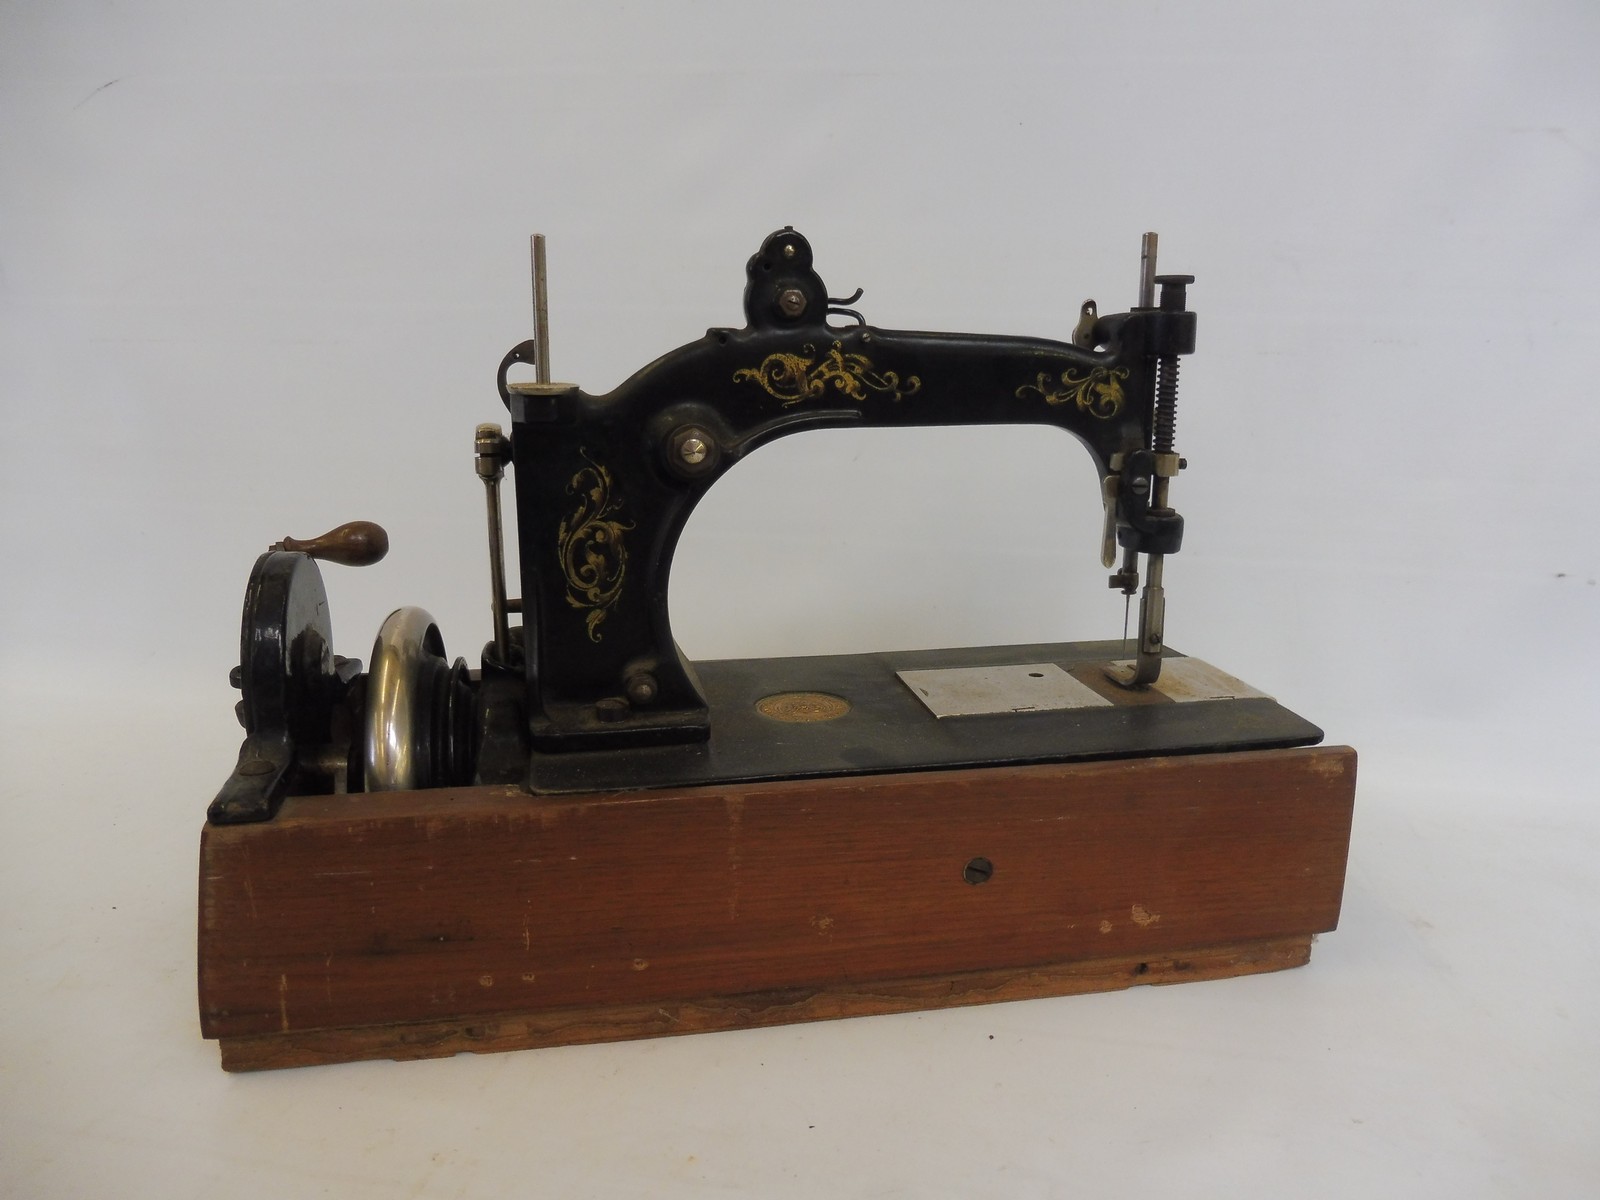 A Wheeler & Wilson of Bridgeport Conn. USA, no.8 sewing machine, in case. - Image 9 of 9